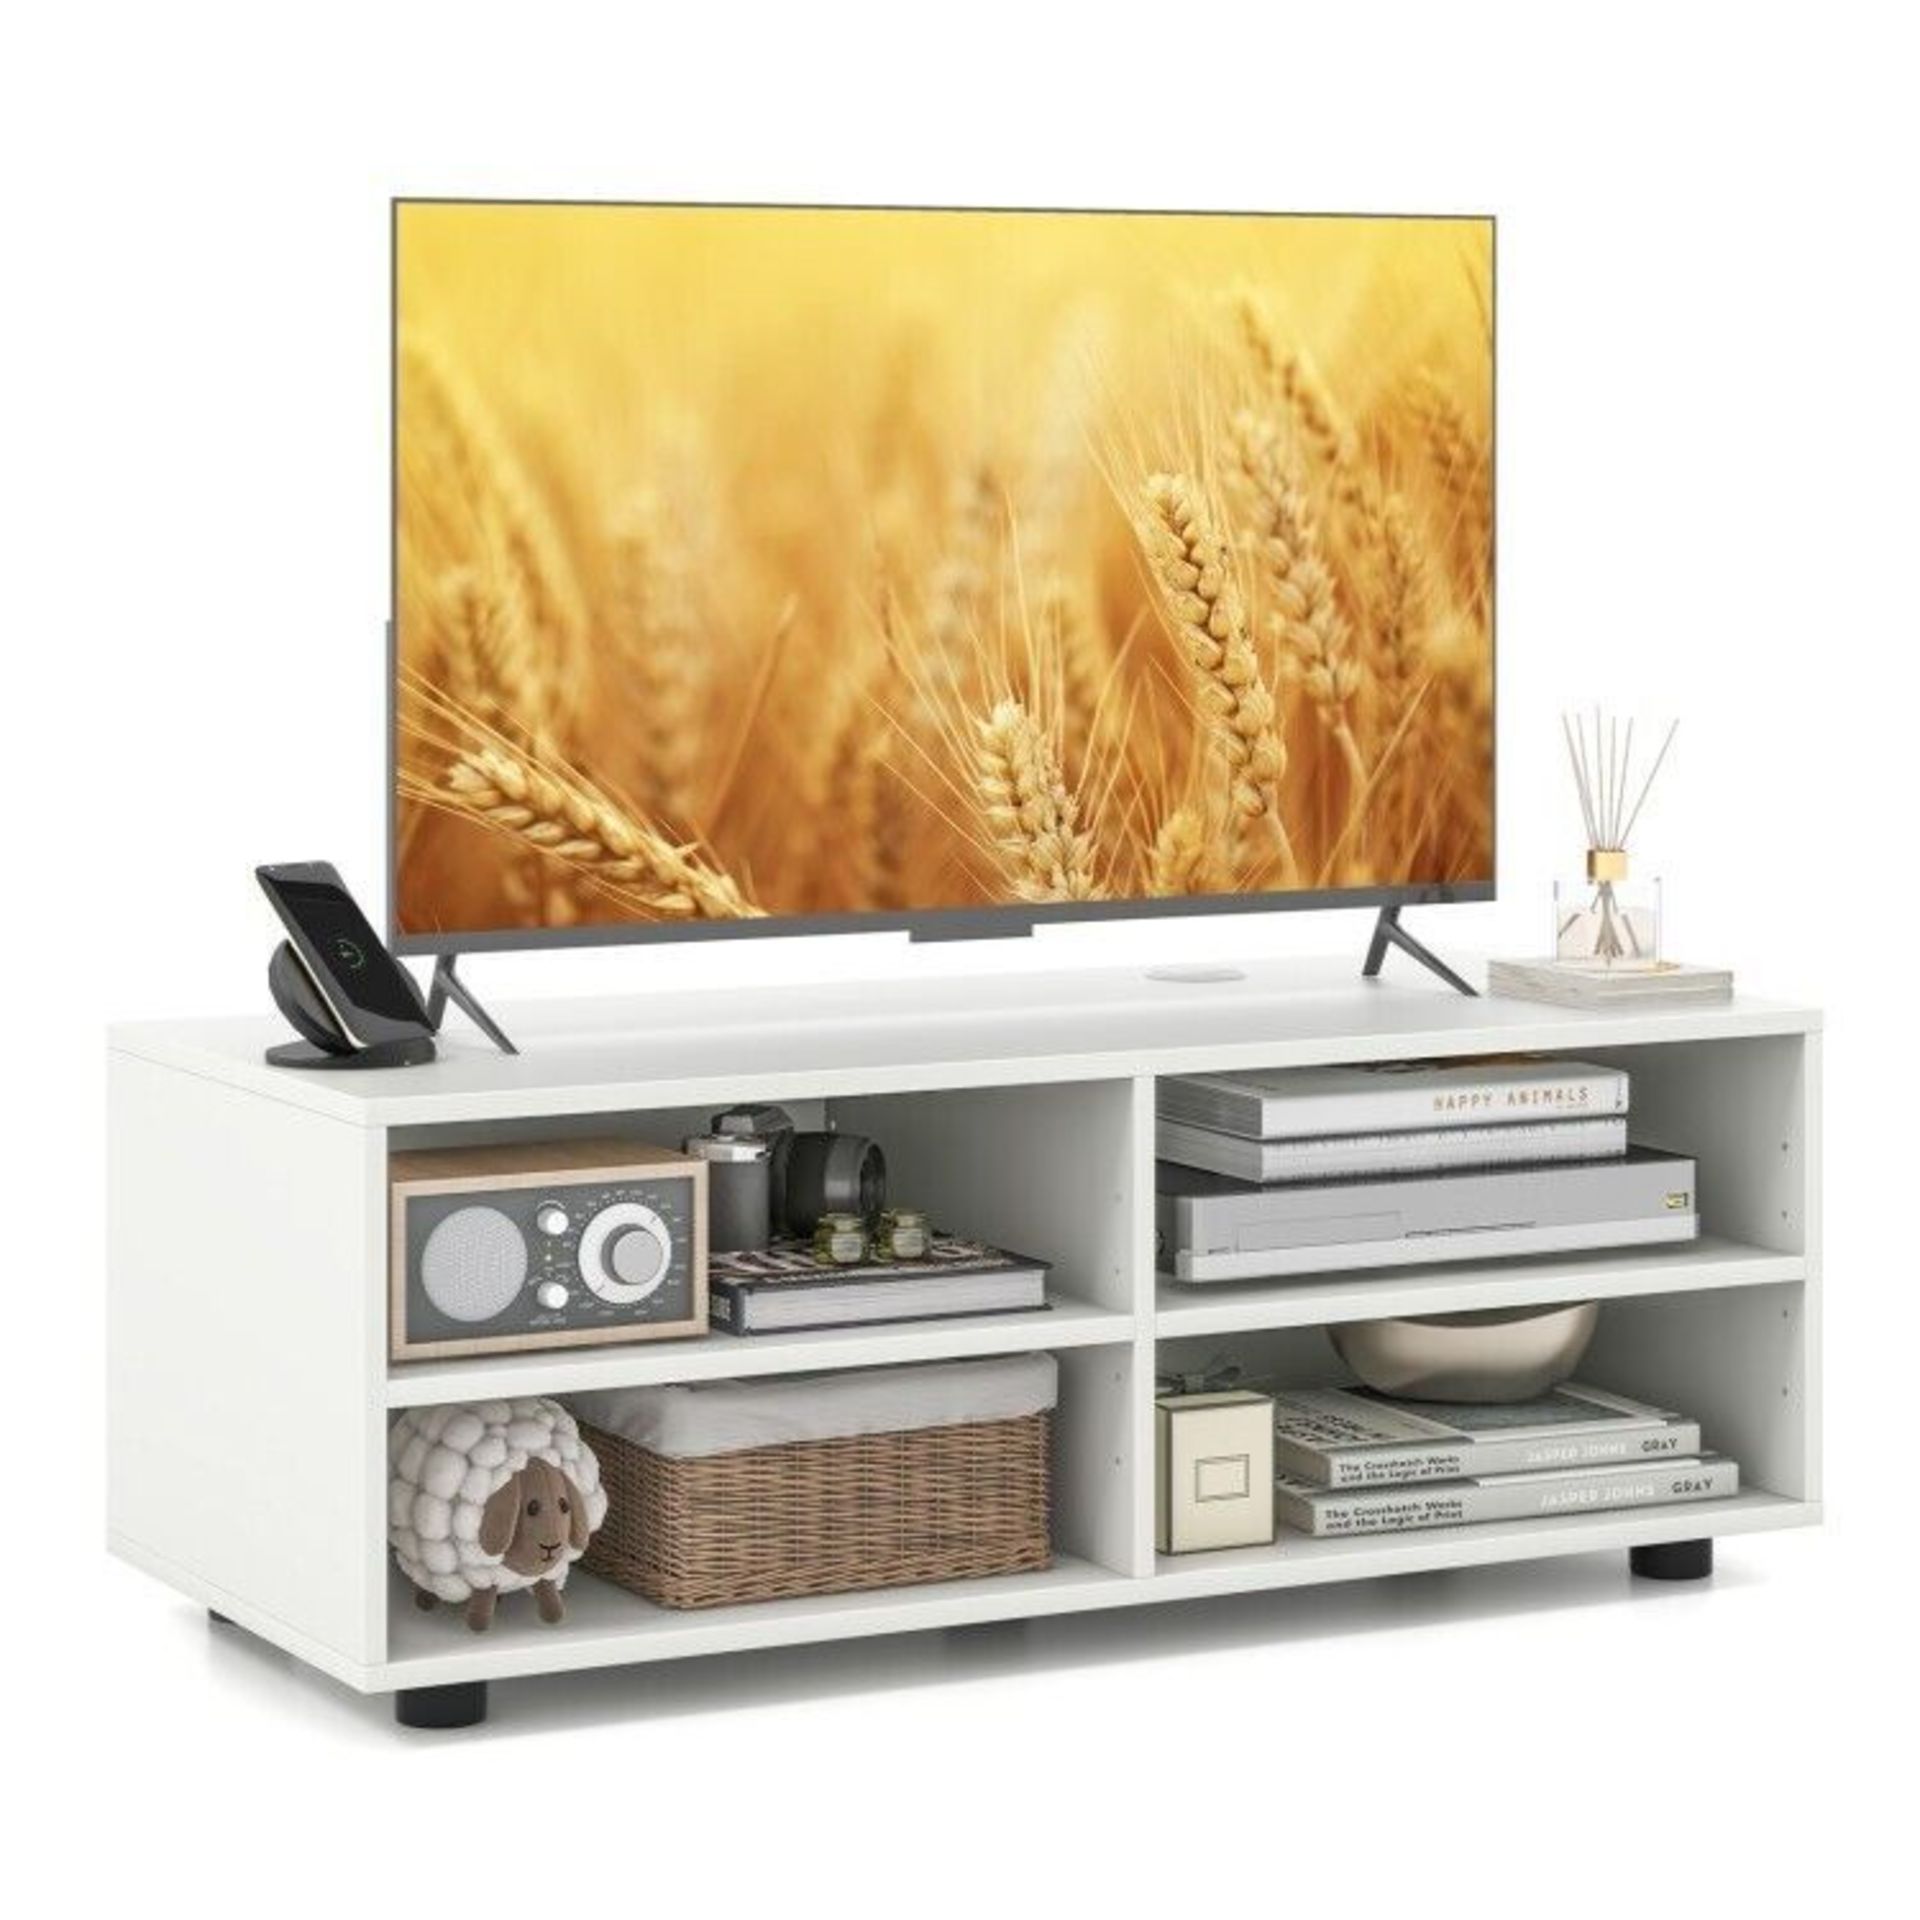 TV Console Table Living Room For TV up to 40" TV Stand With Open Storage Shelves. - R13a.5.